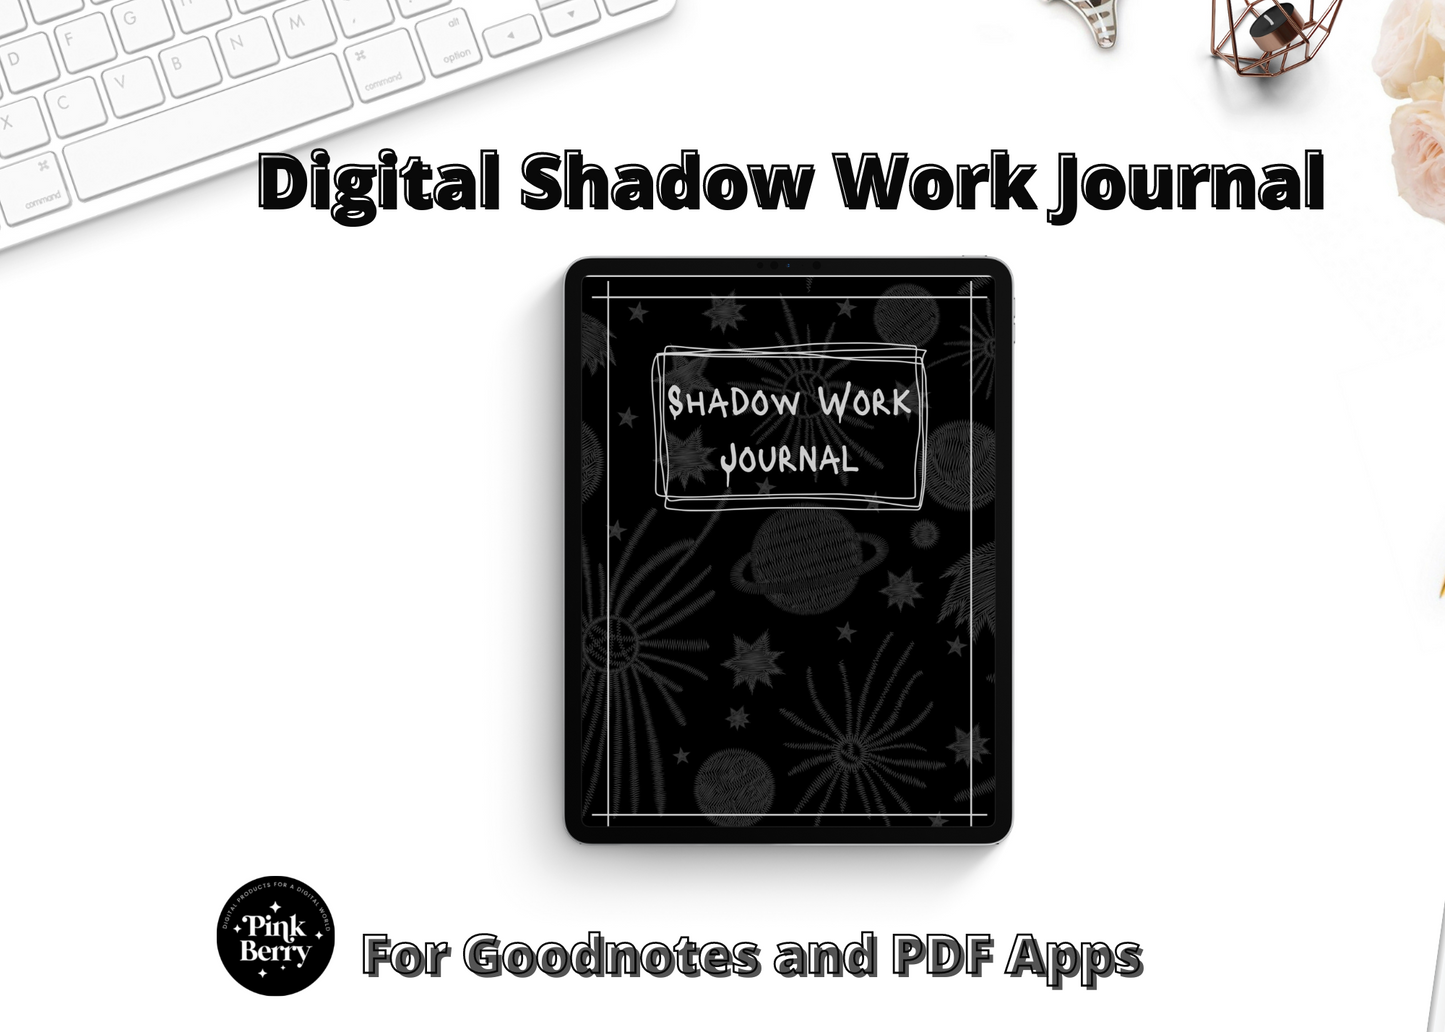 Digital Shadow Work Journal- Dark Mode | Mental Health Journal For Goodnotes and Notability 